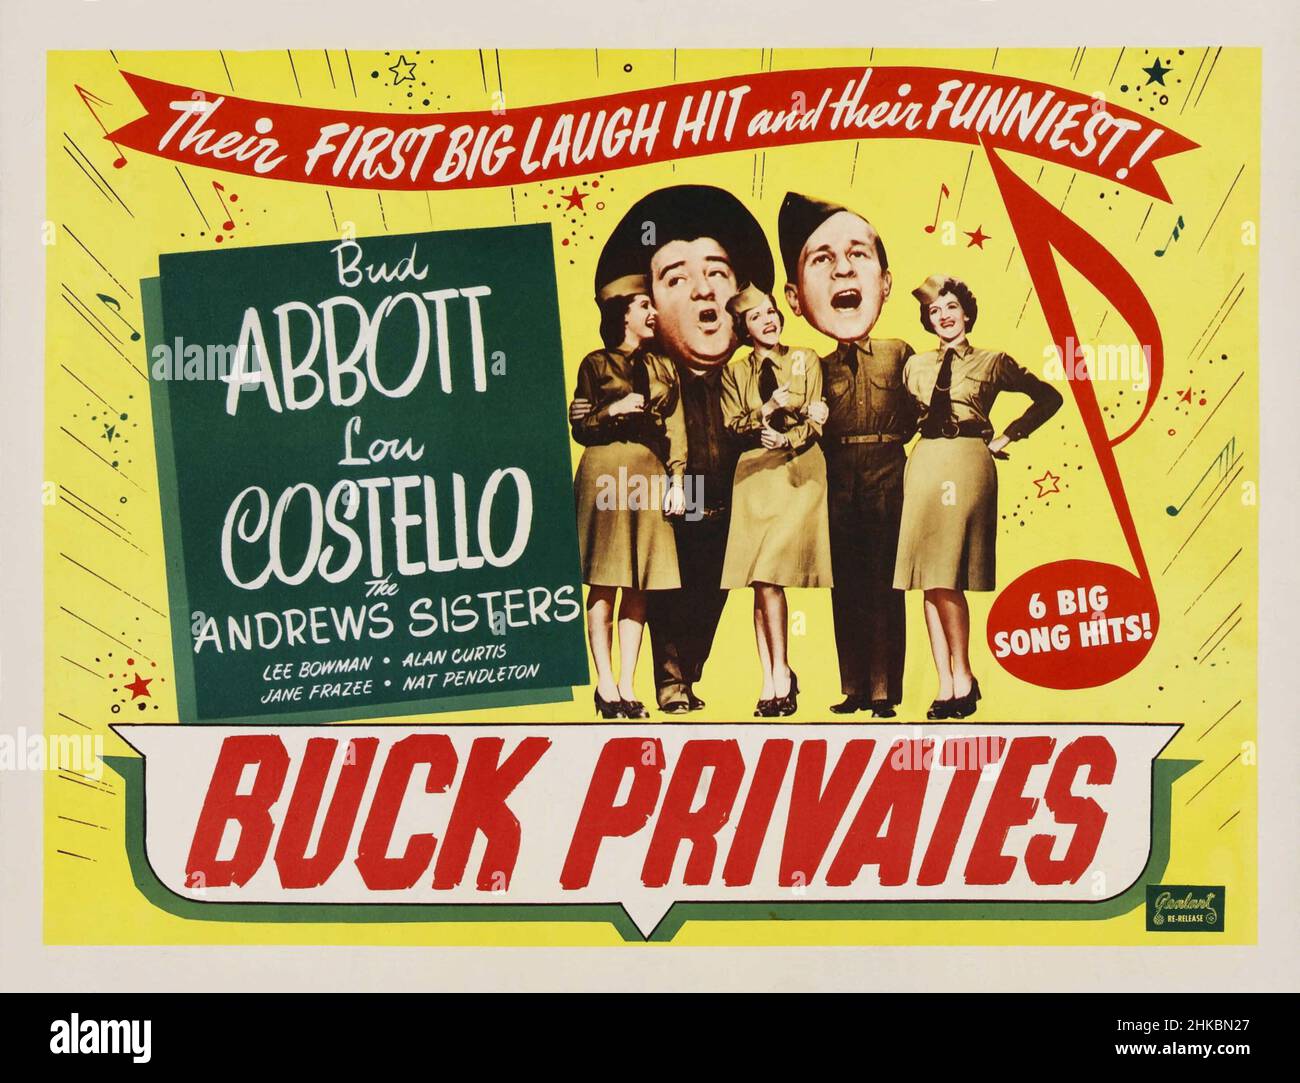 BUD ABBOTT, LOU COSTELLO and THE ANDREWS SISTERS in BUCK PRIVATES (1941), directed by ARTHUR LUBIN. Credit: UNIVERSAL INTERNATIONAL / Album Stock Photo